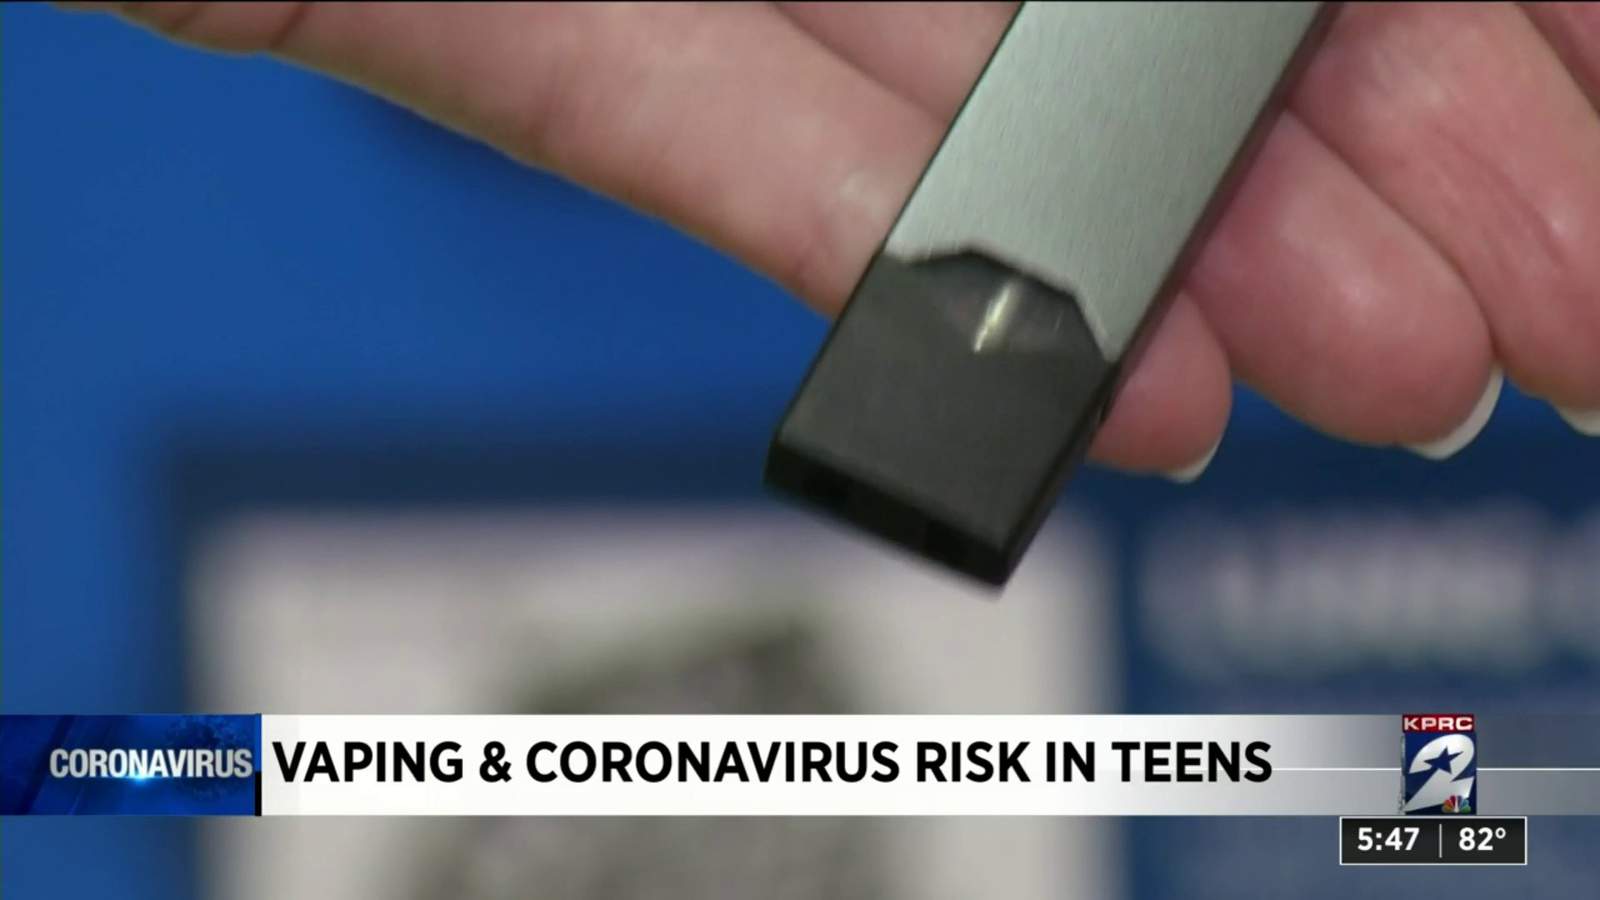 Vaping could make COVID-19 cases more severe in teens